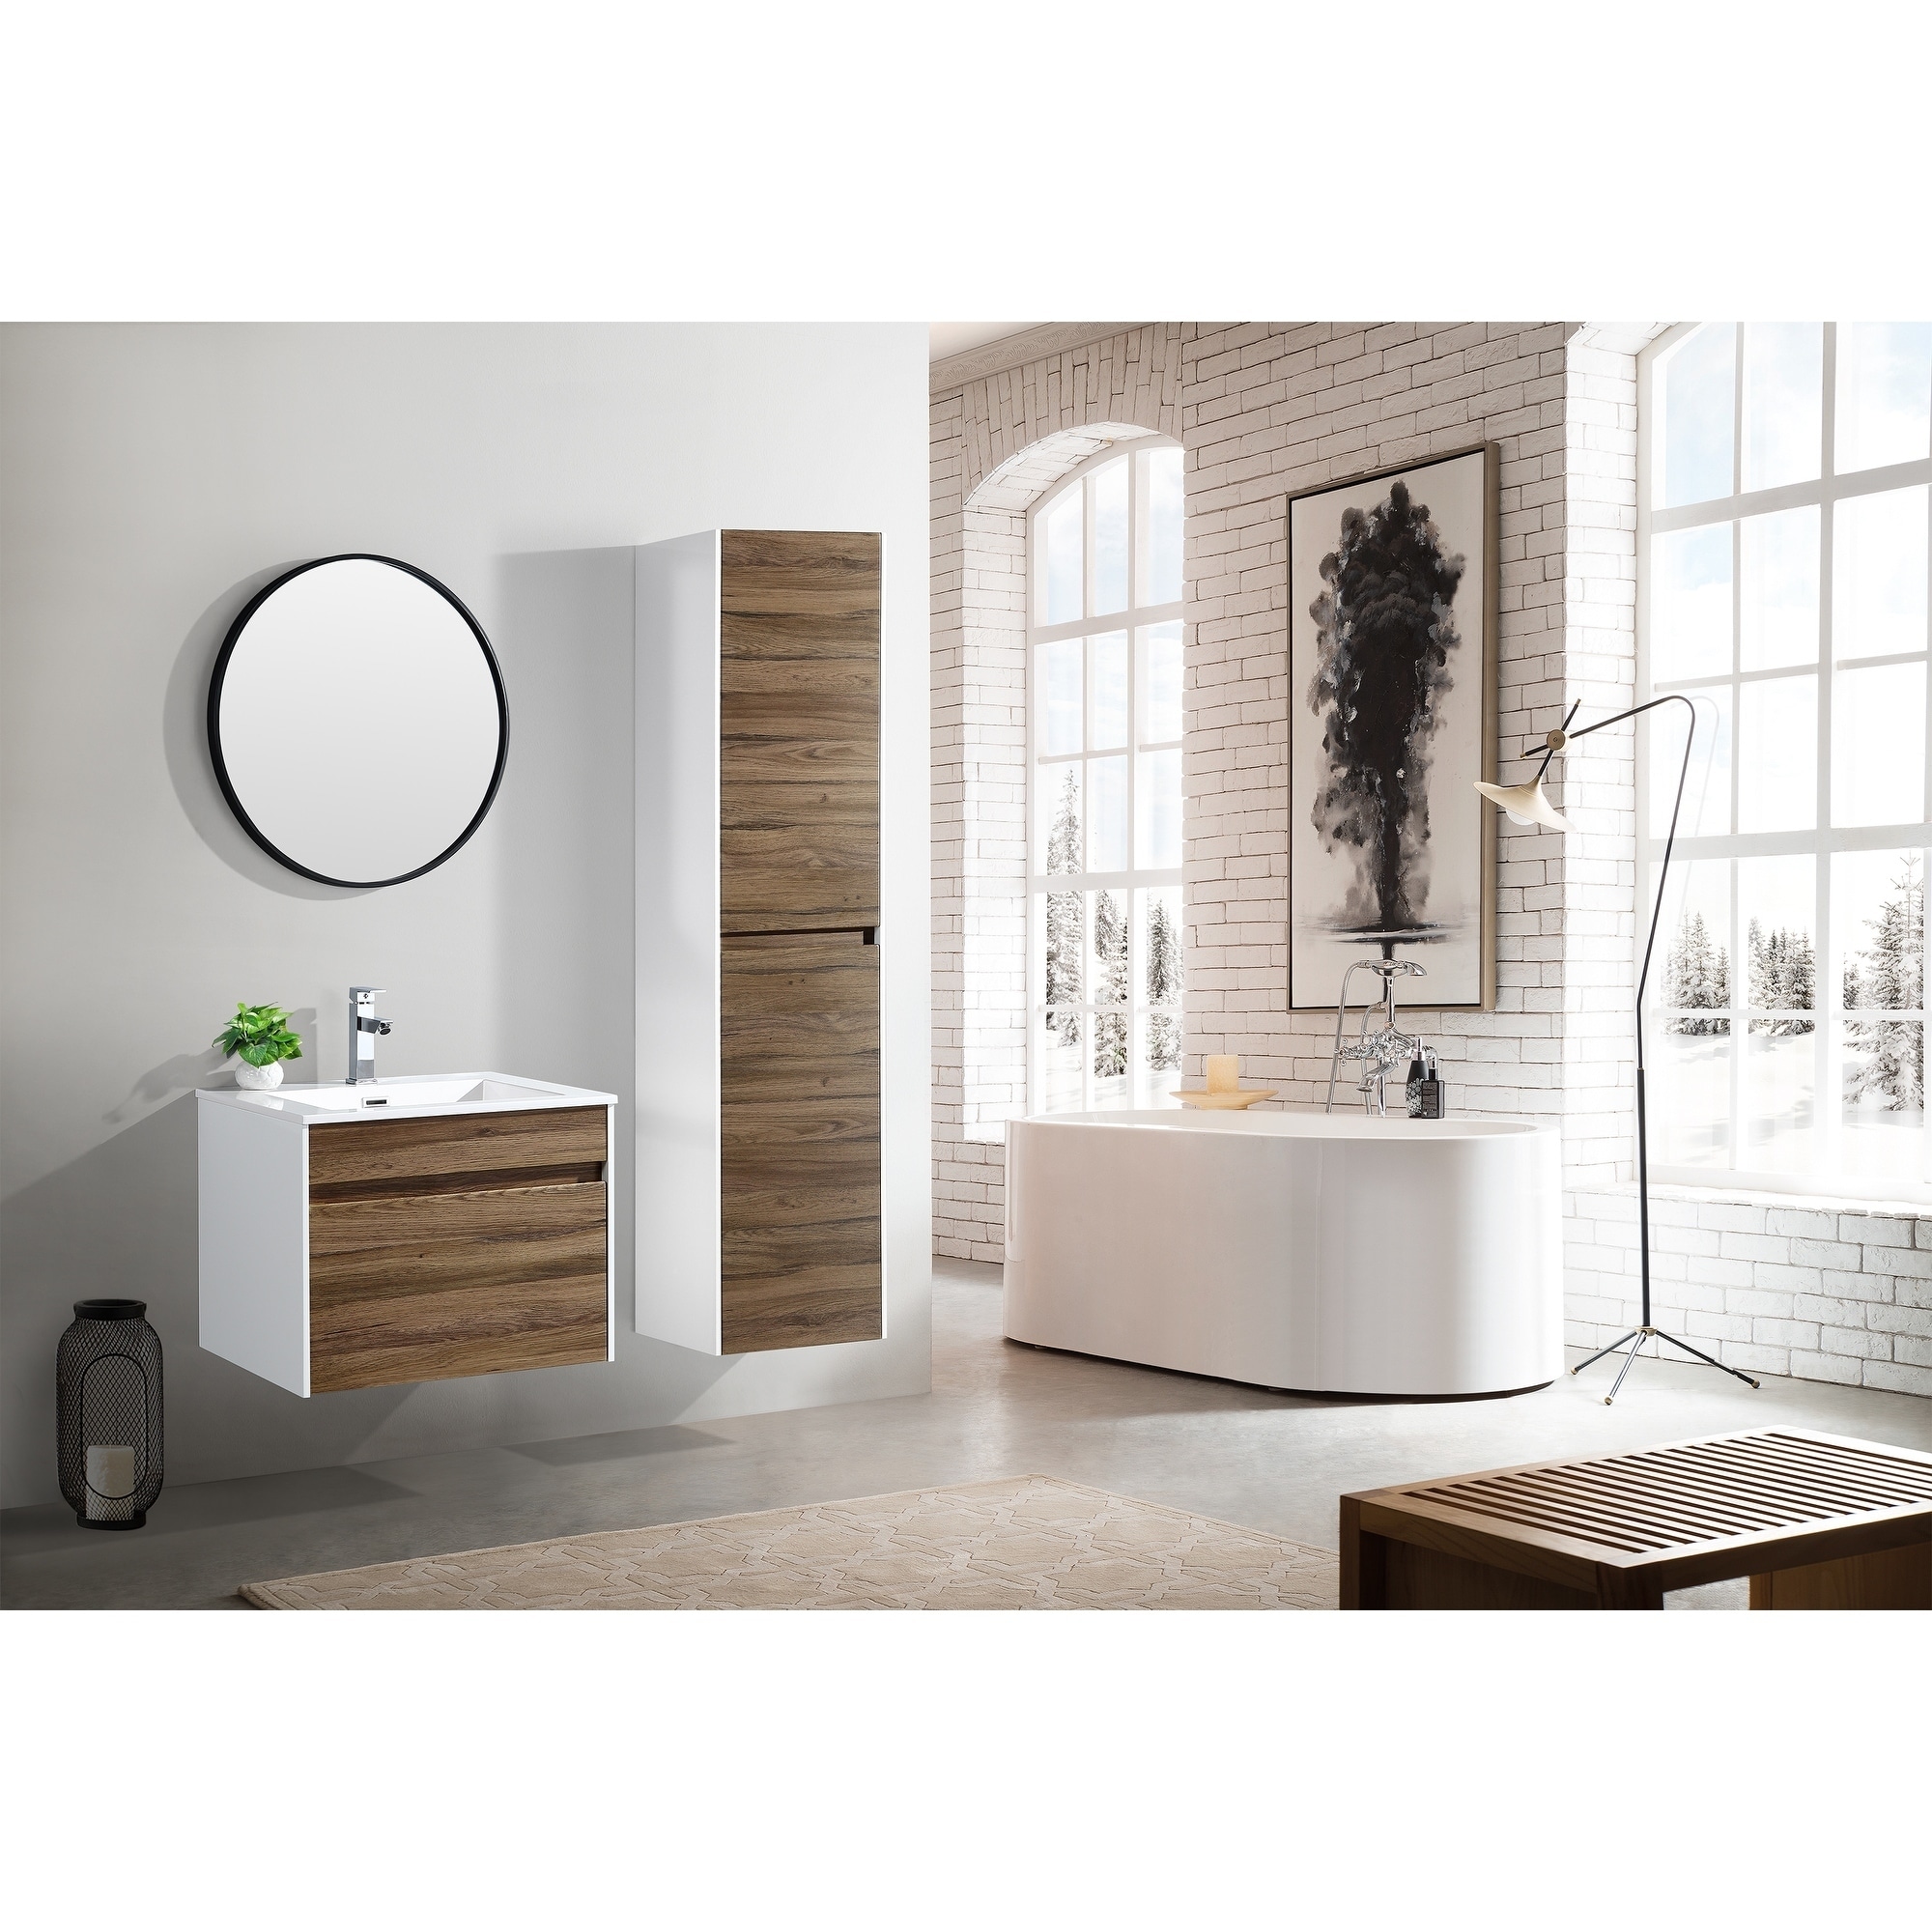 The Ivy Collection 24 Inch Floating Modern Bathroom Vanity Overstock 20979046